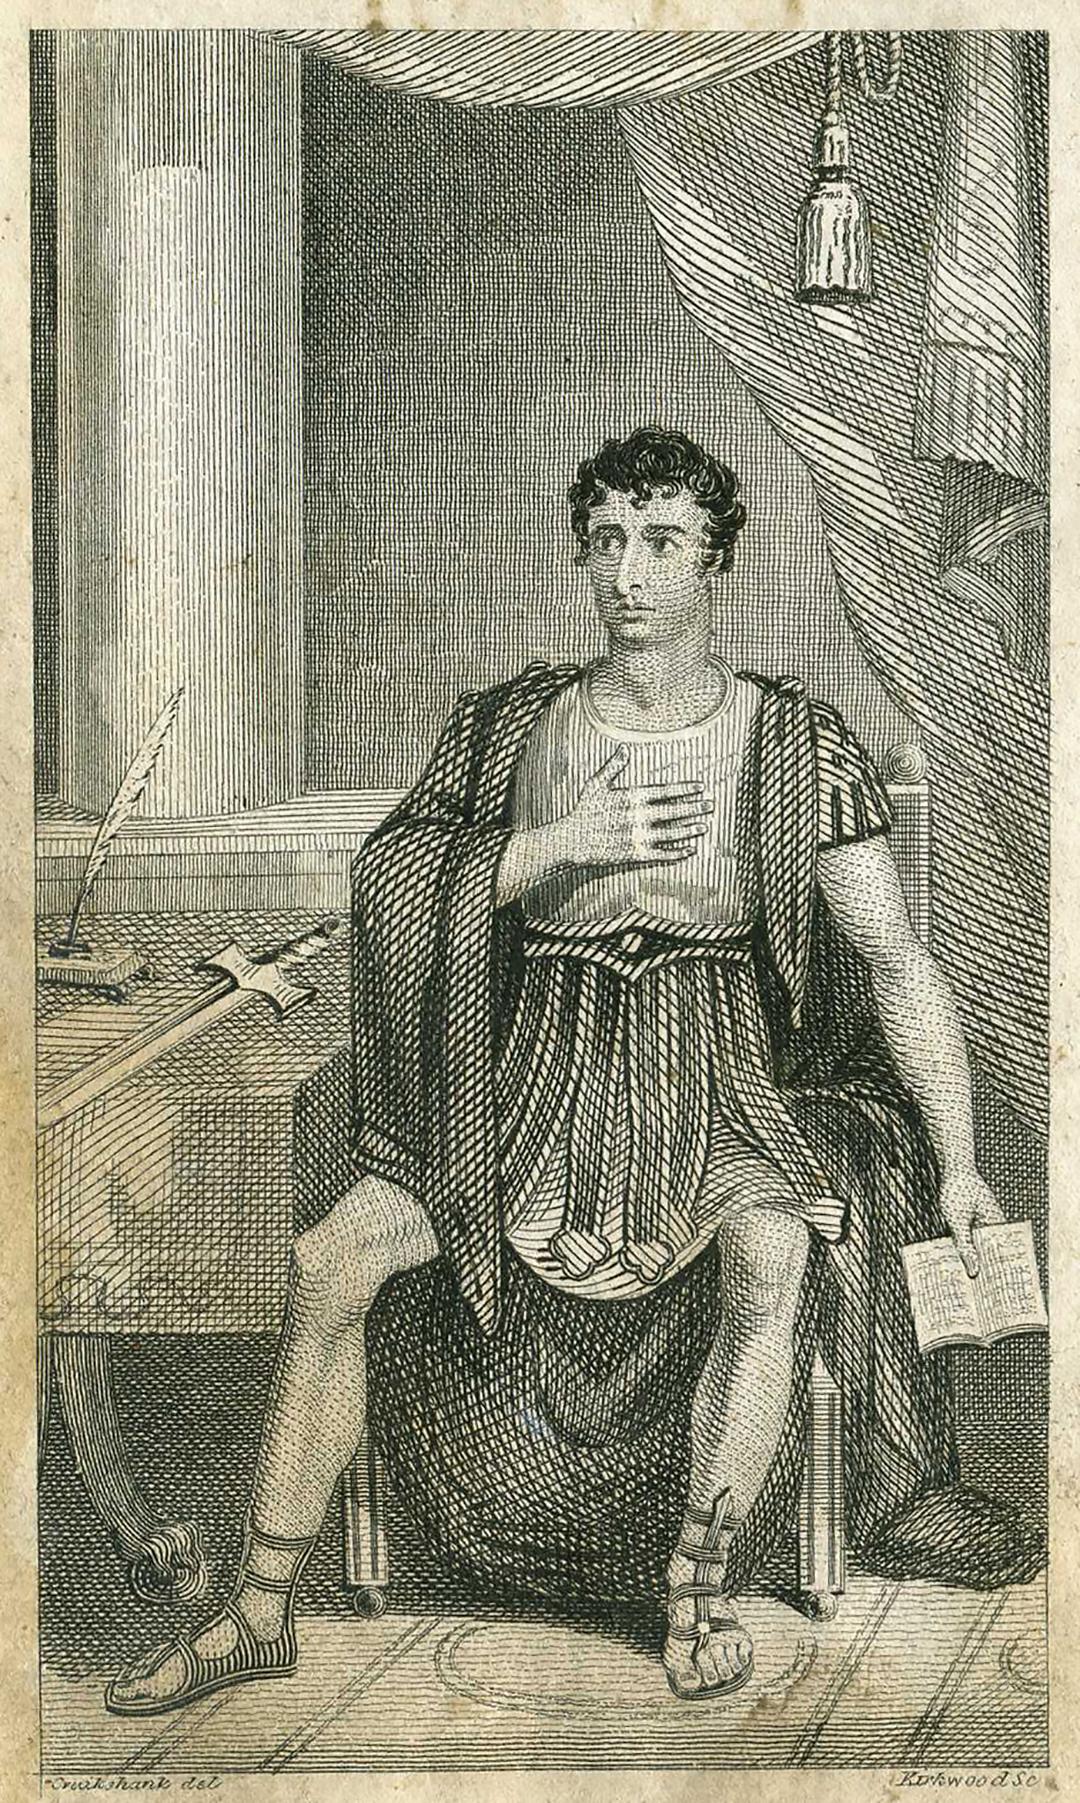 John Kemble as Cato in Joseph Addison's “Cato: A Tragedy.” Drawing by George Cruikshank and engraved by Kirkwood in 1822. (Public Domain)